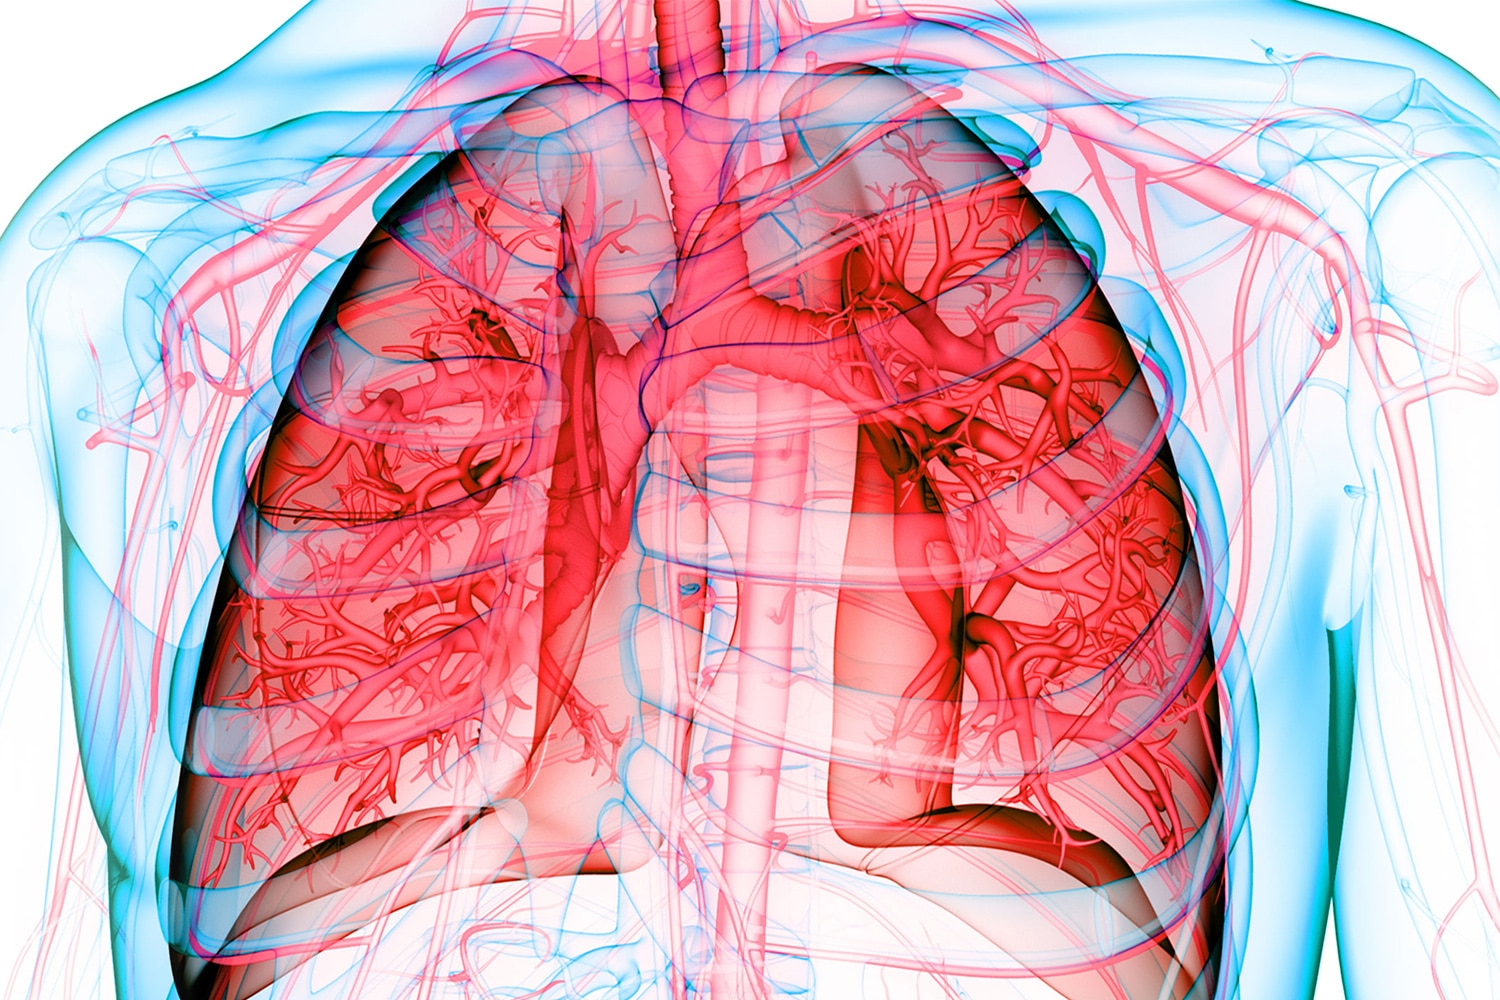 Looking Closely at Lung Cancer